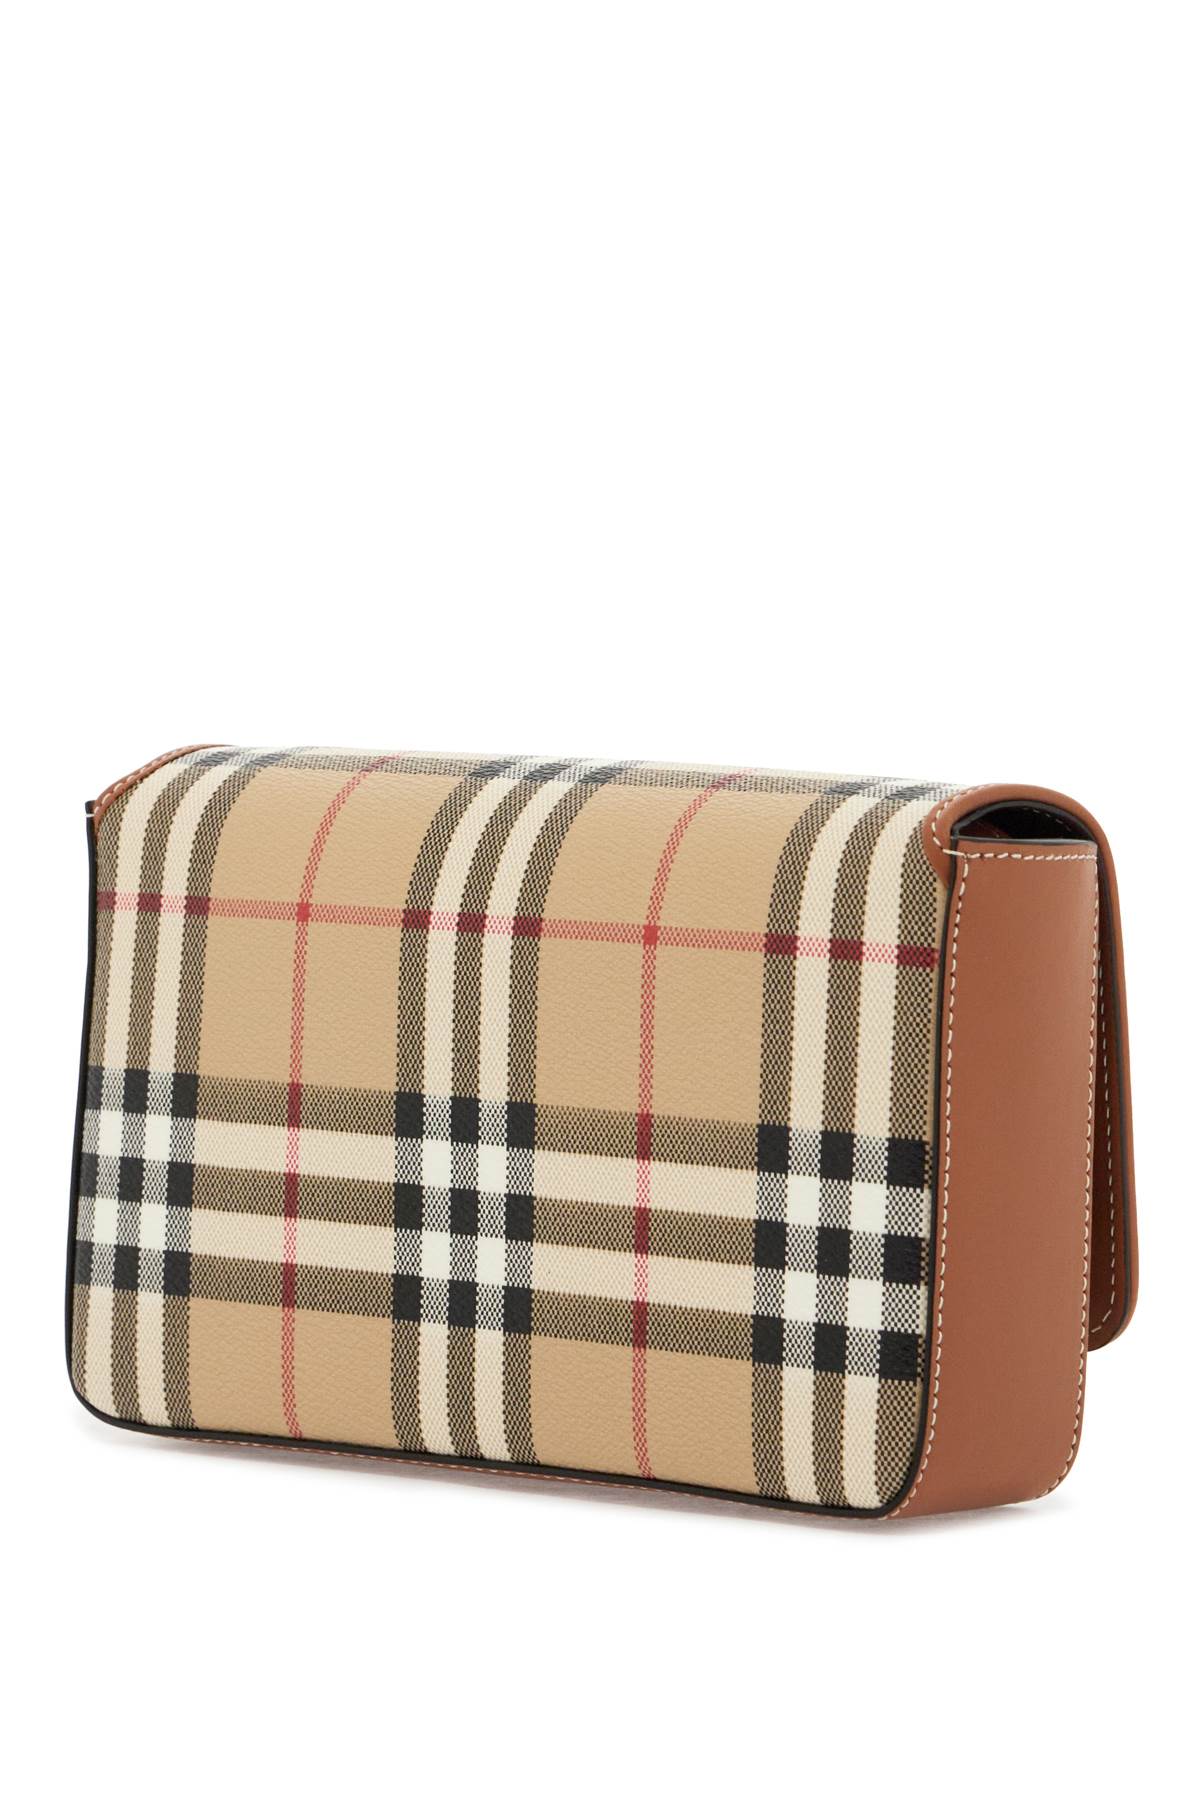 Burberry "checkered shoulder bag with strap - Beige